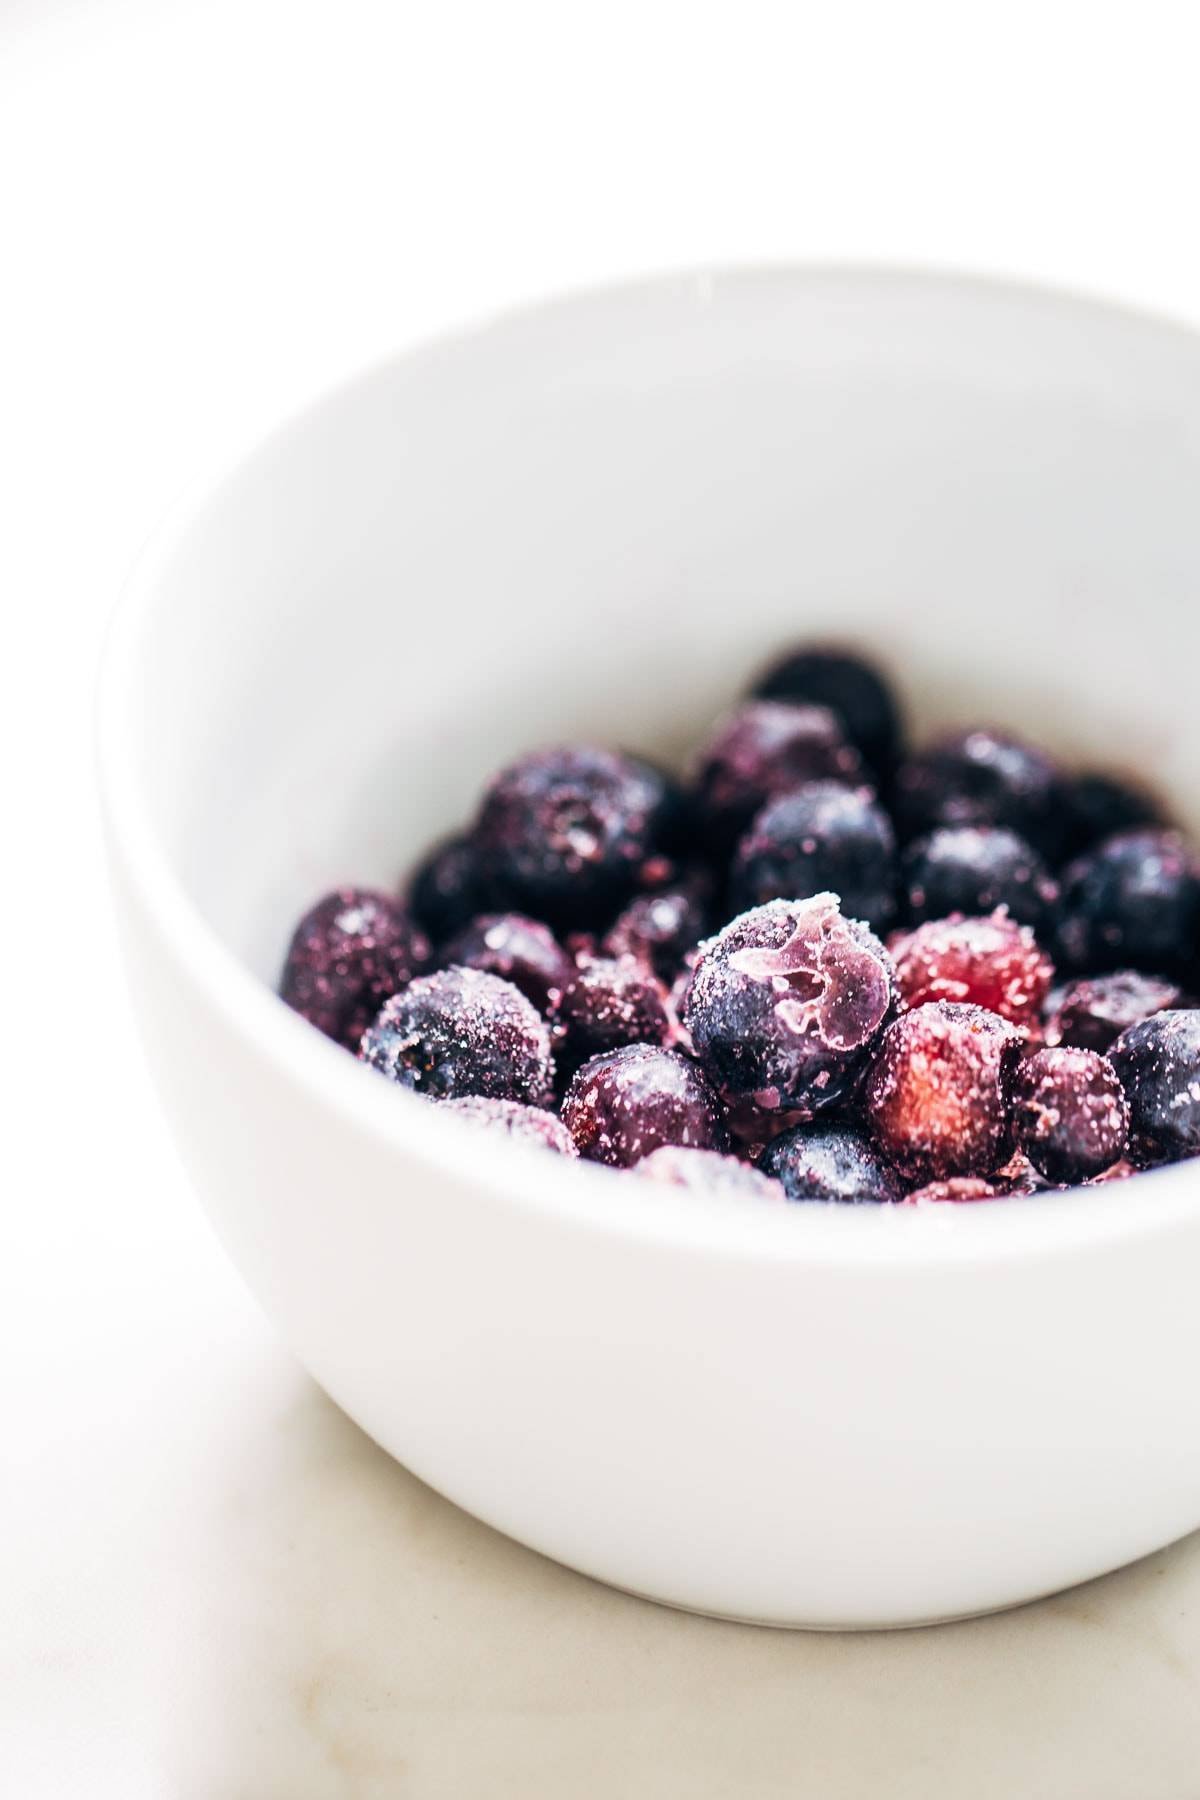 Frozen blueberries in a white bowl.